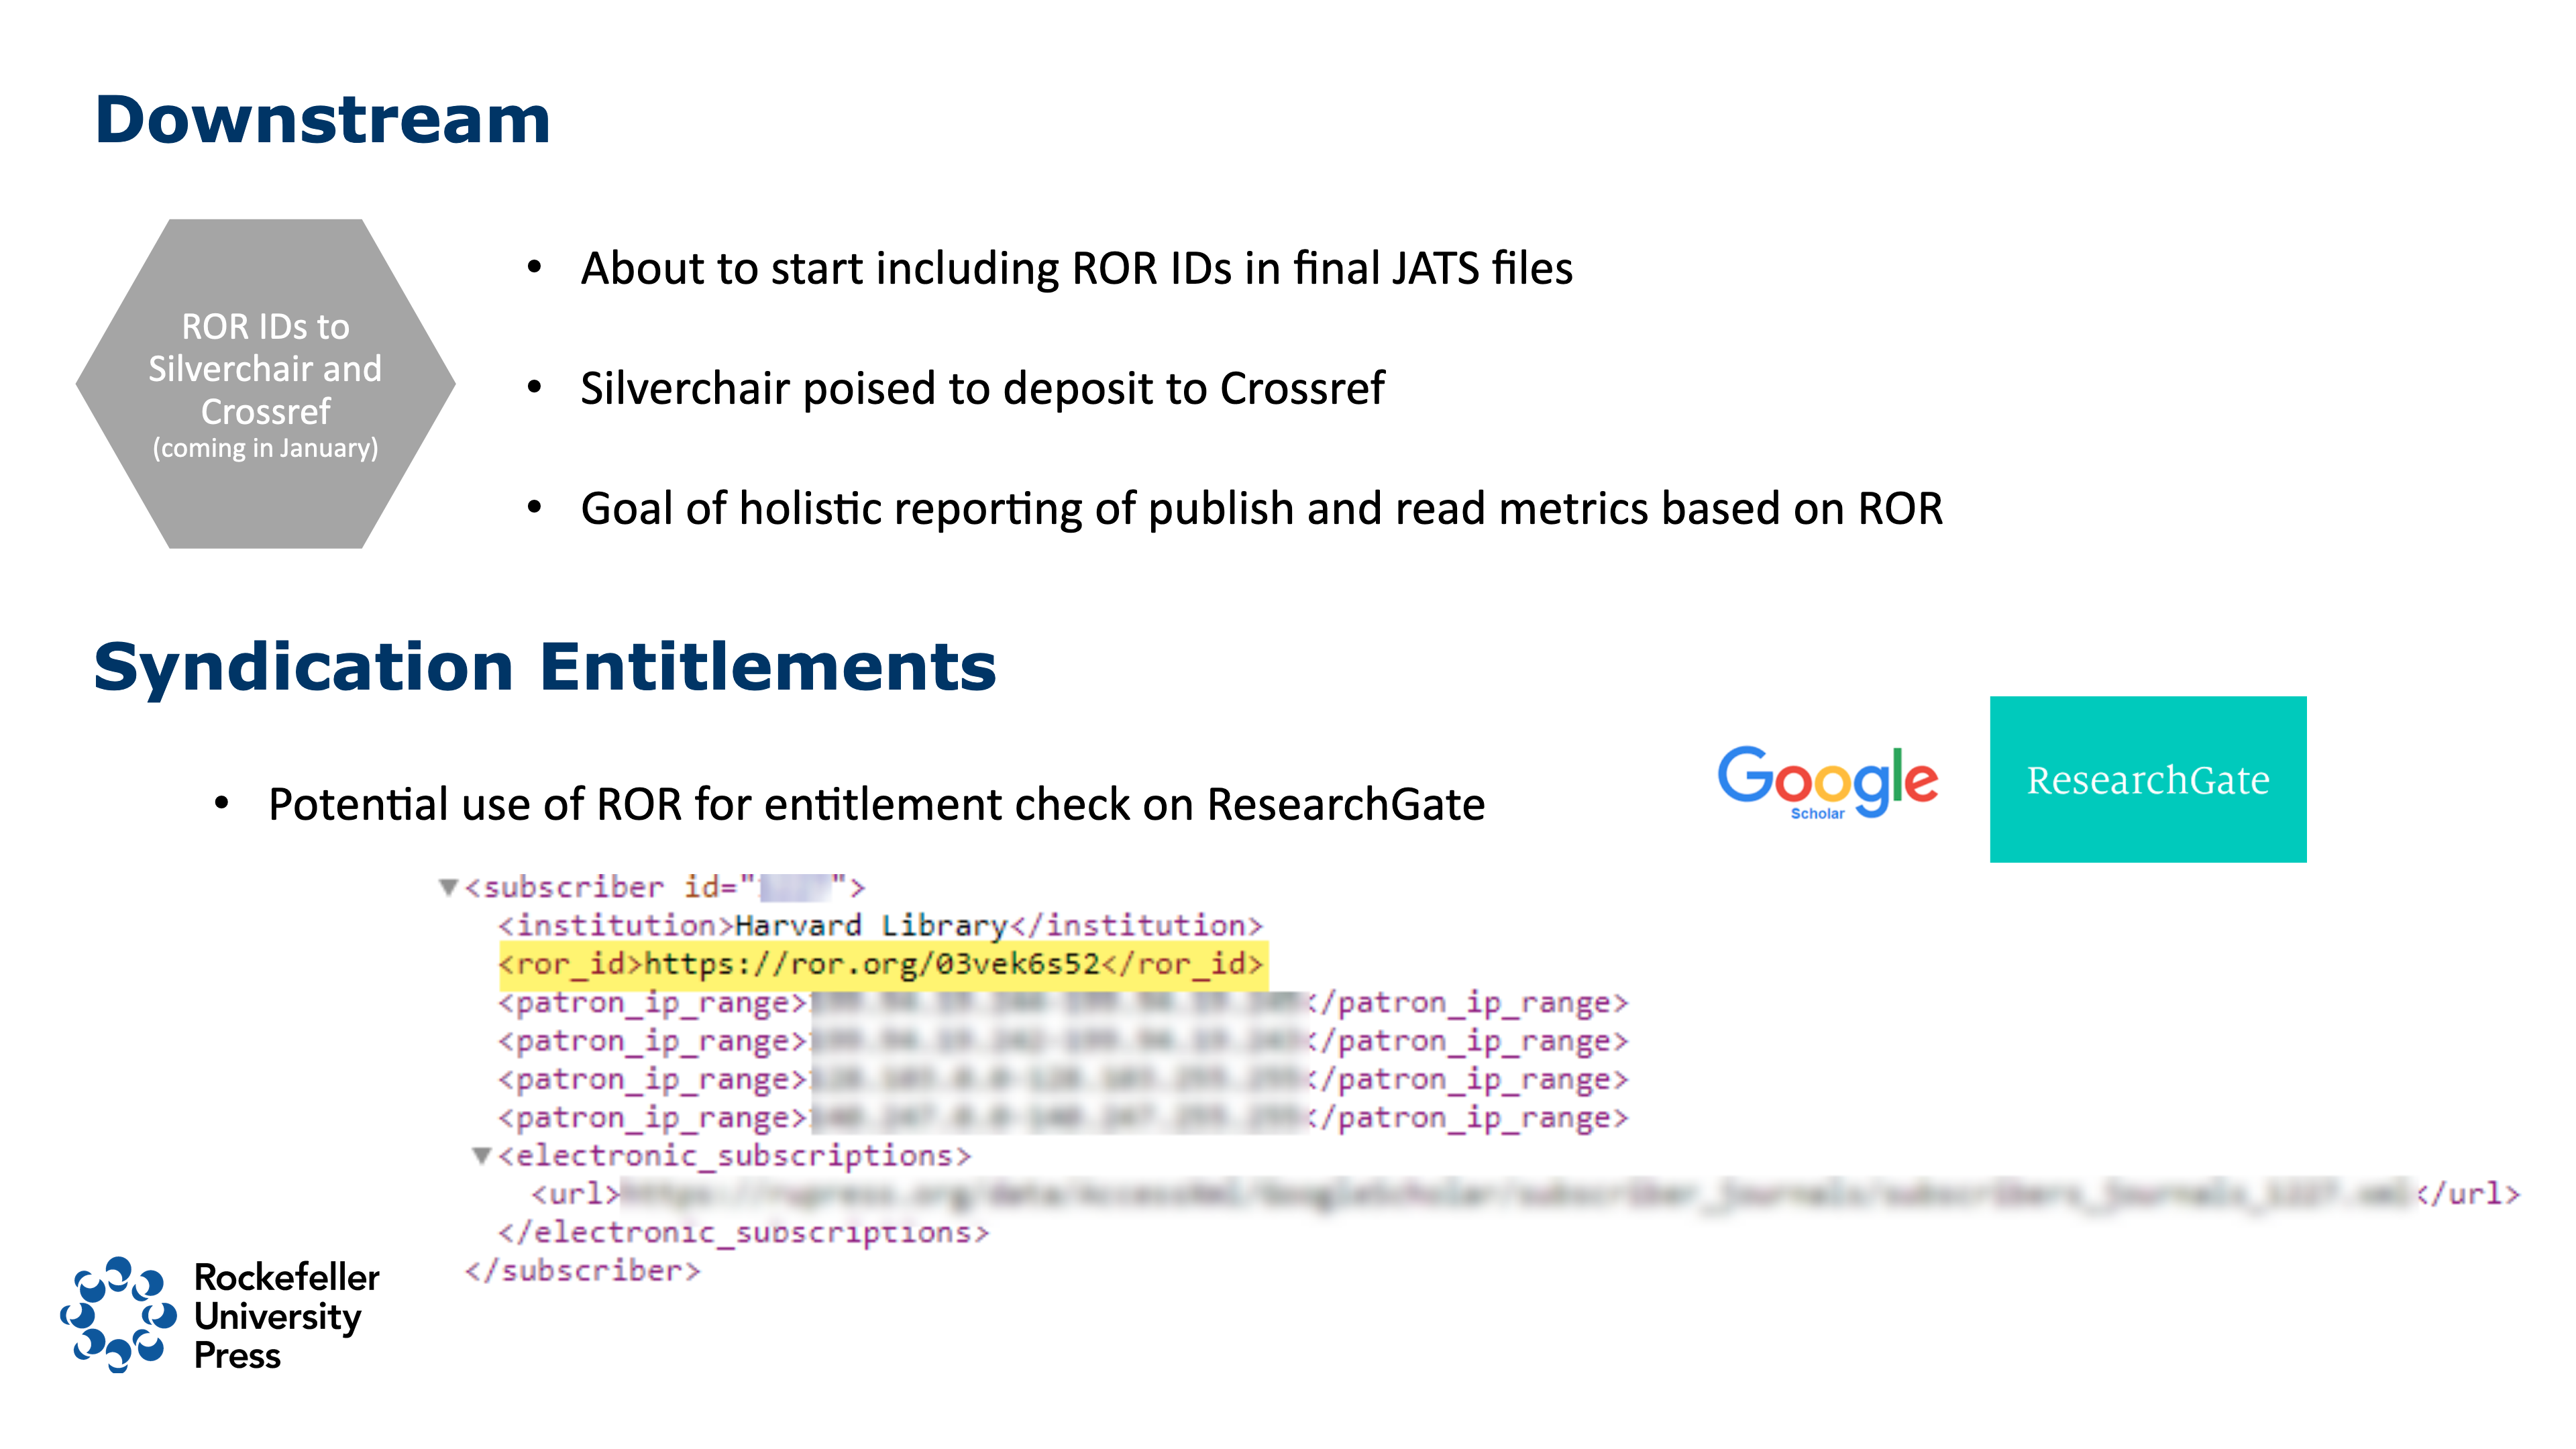 Downstream: Sending ROR IDs to Silverchair and Crossref, about to start including ROR IDs in final JATS files, Silverchair poised to deposit to Crossref, goal is holistic reporting of publish and read metrics based on ROR, potential use of ROR for syndication entitlement check on ResearchGate